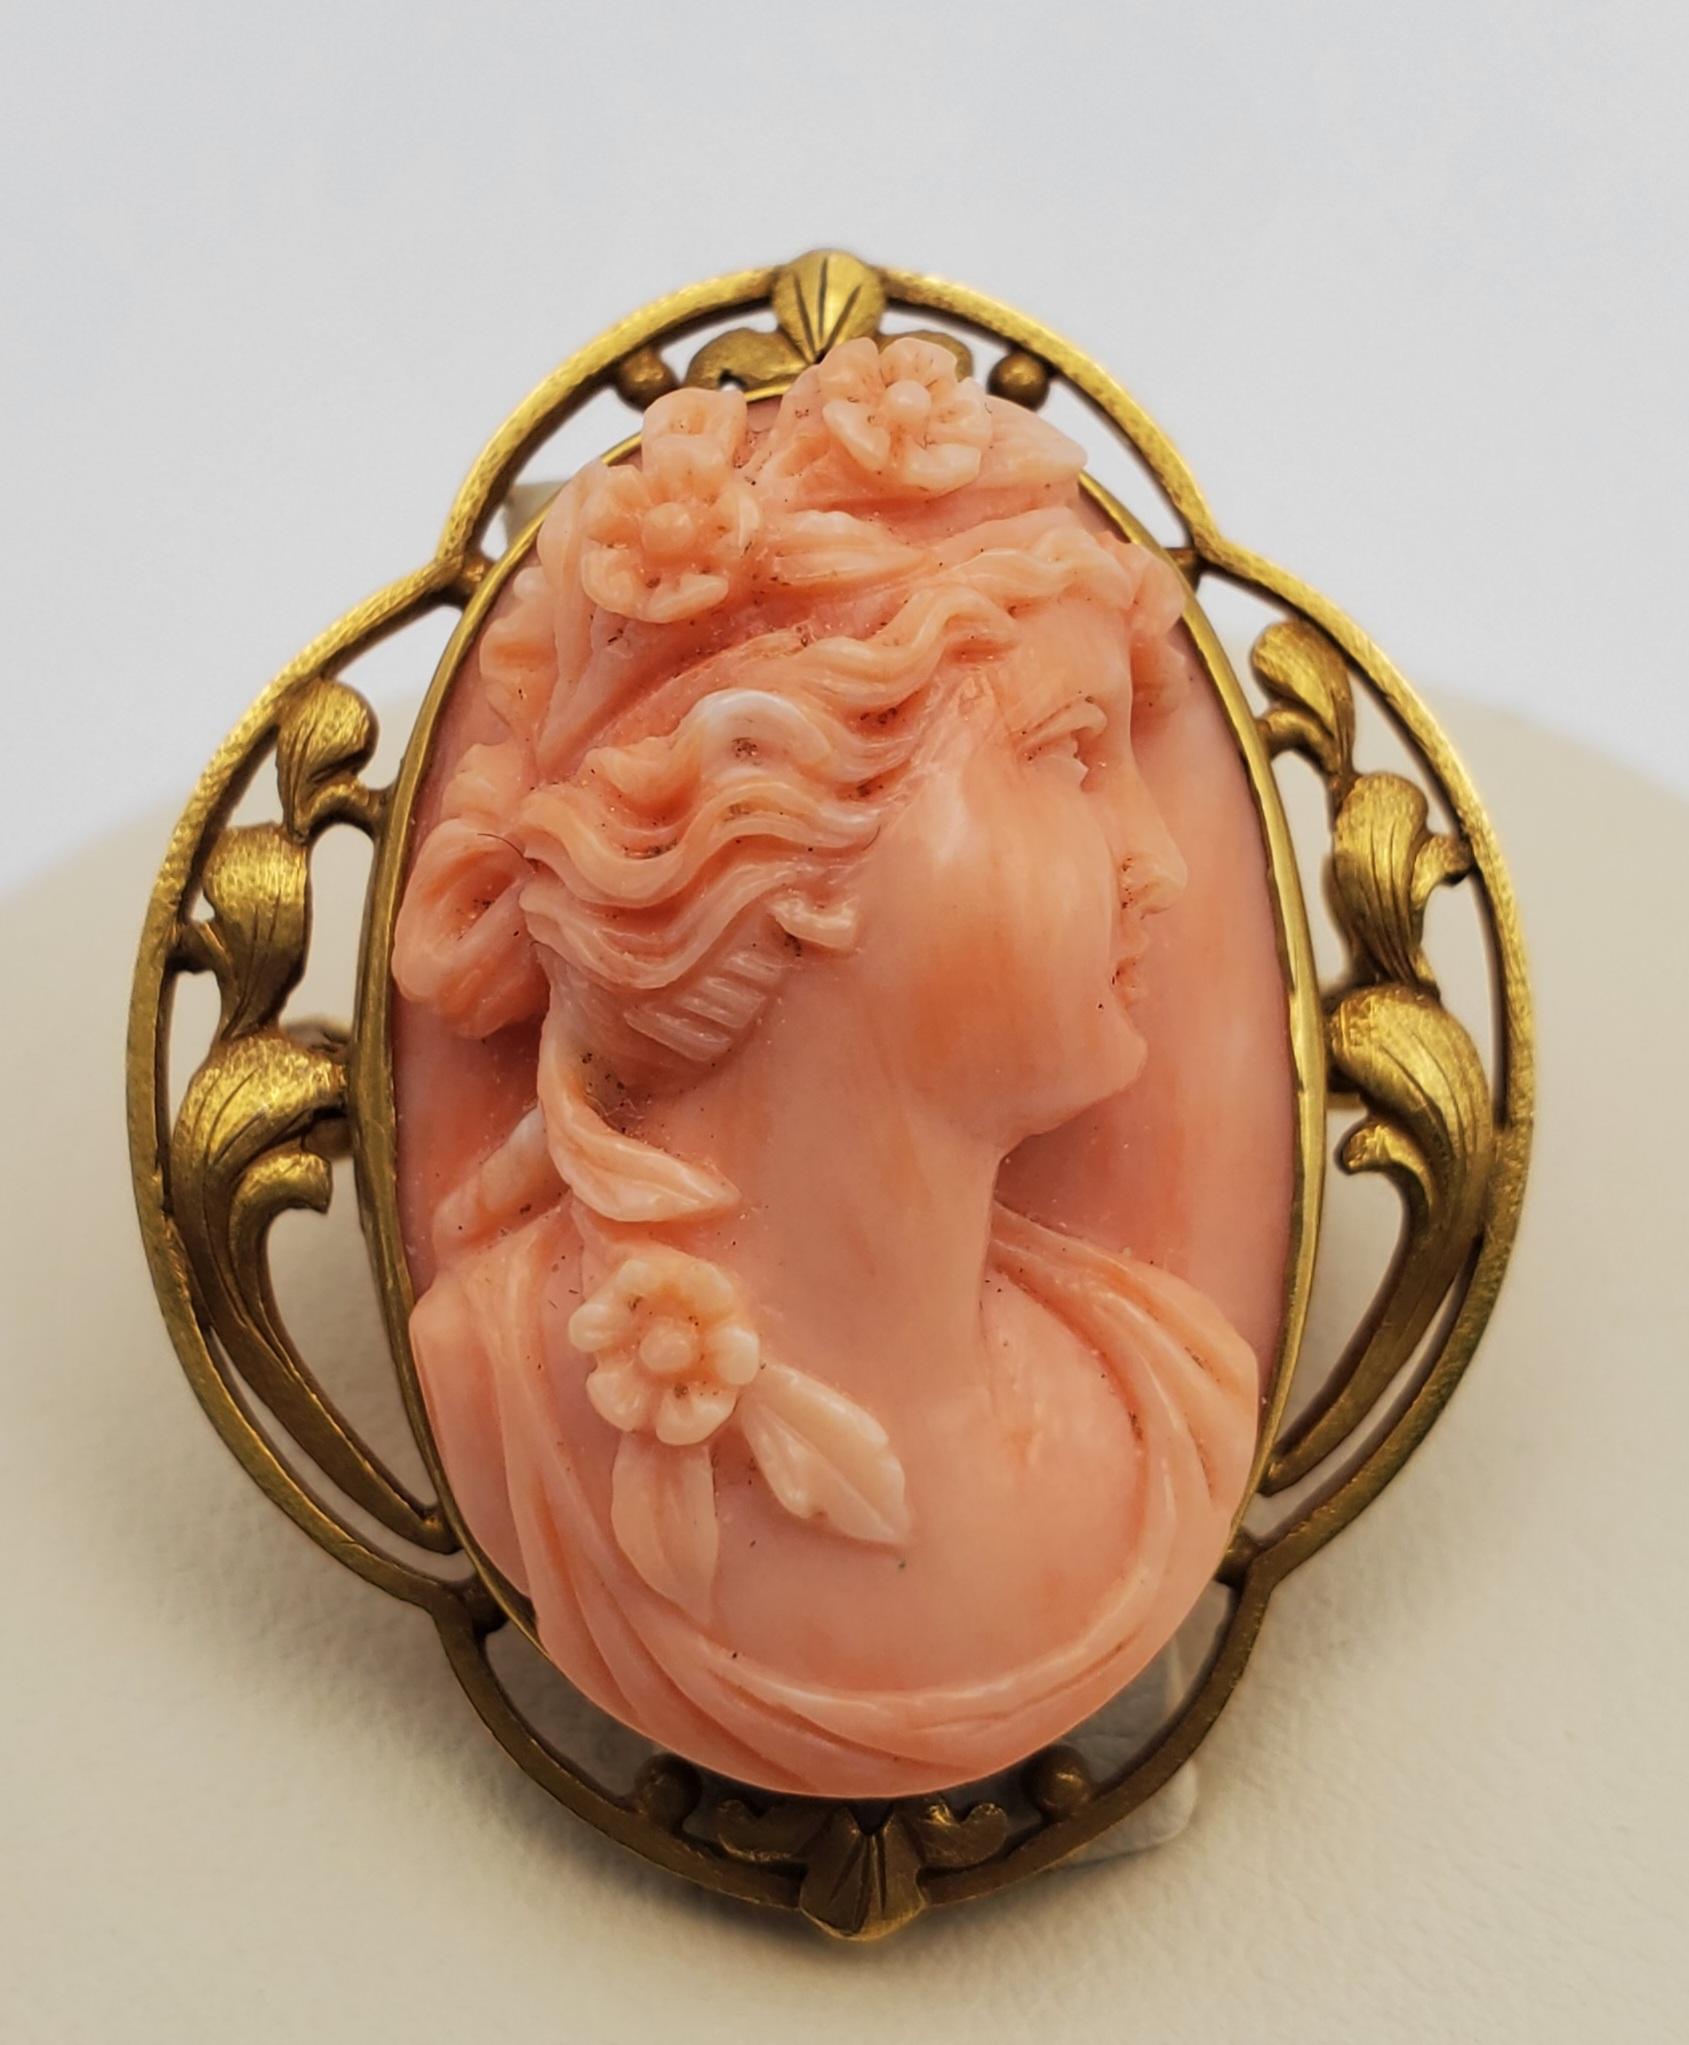 18K Yellow Gold Classic Beauty Natural Coral Cameo Convertible Pendant/Brooch from approximately the 1890s. The brooch consists of a oval shaped bezel set natural coral cameo in a filagree elongated quatrefoil shape. The cameo is a lovely carving of